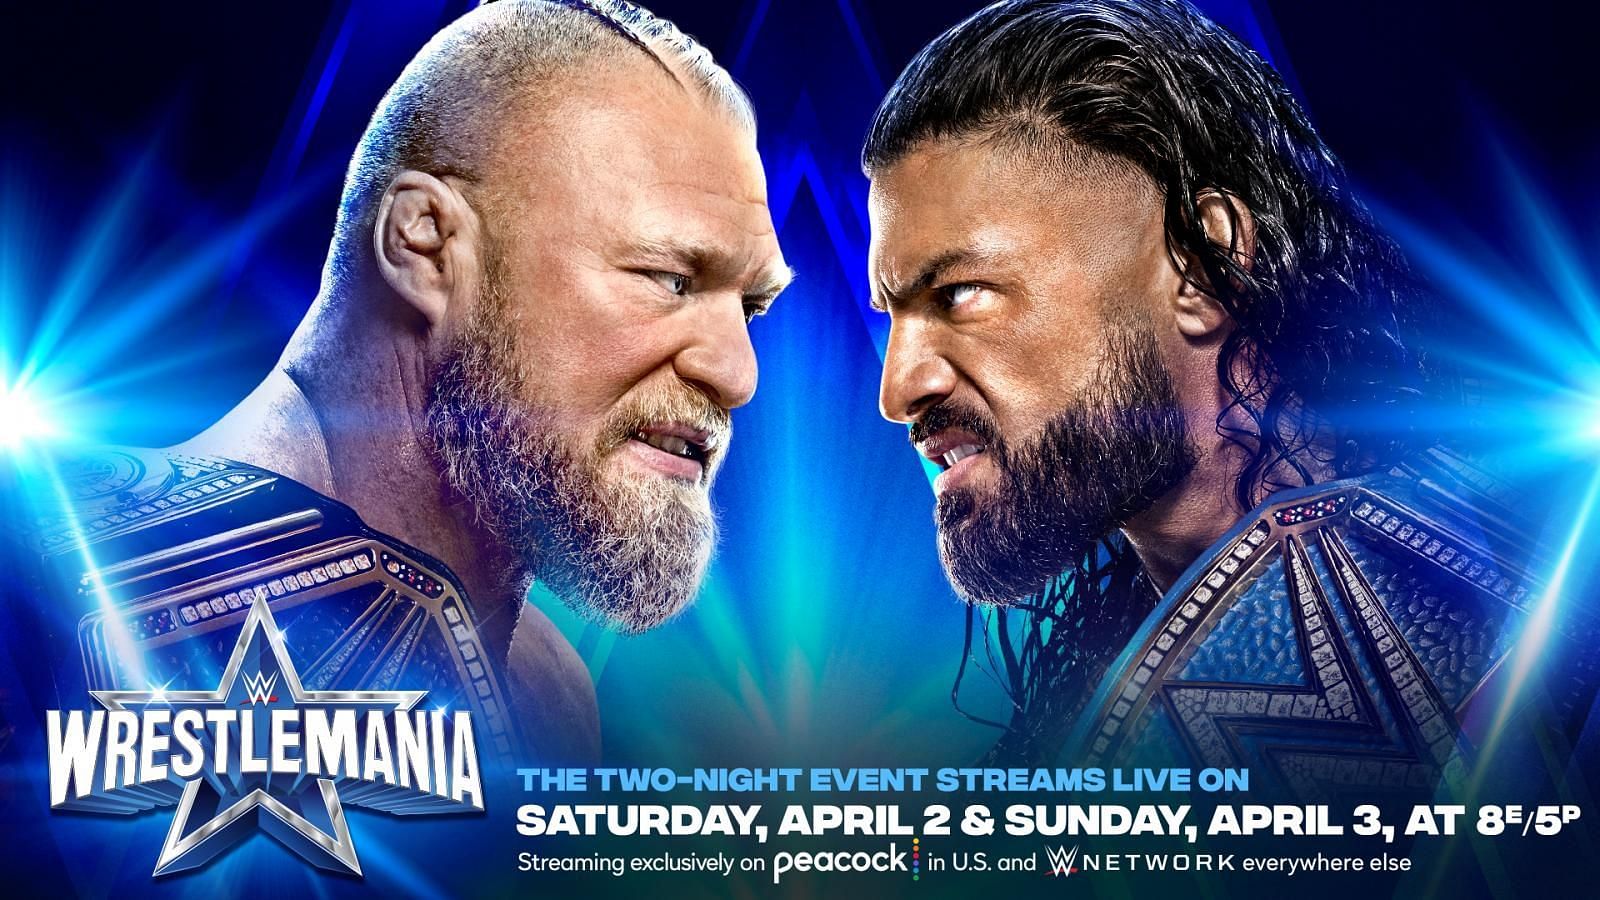 WrestleMania is the biggest extravaganza in pro wrestling